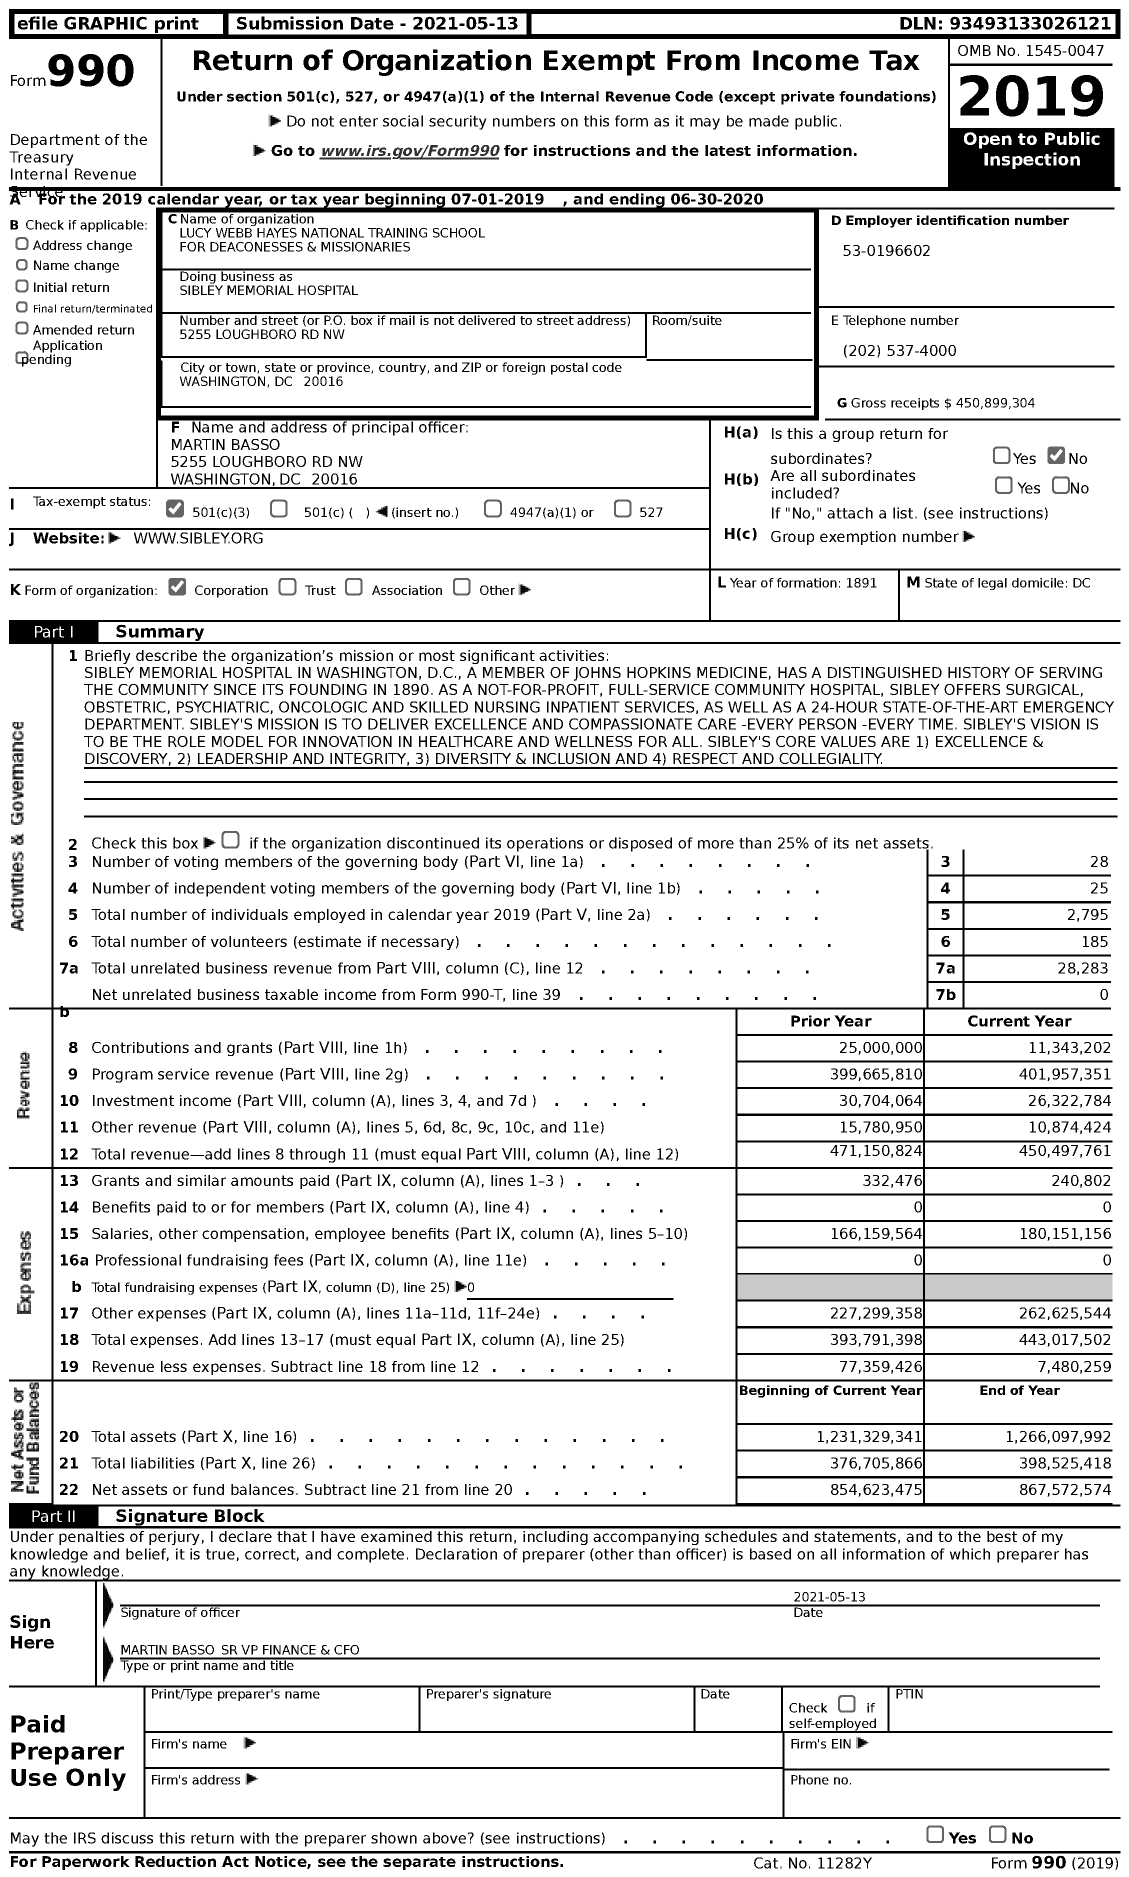 Image of first page of 2019 Form 990 for Sibley Memorial Hospital (SMH)